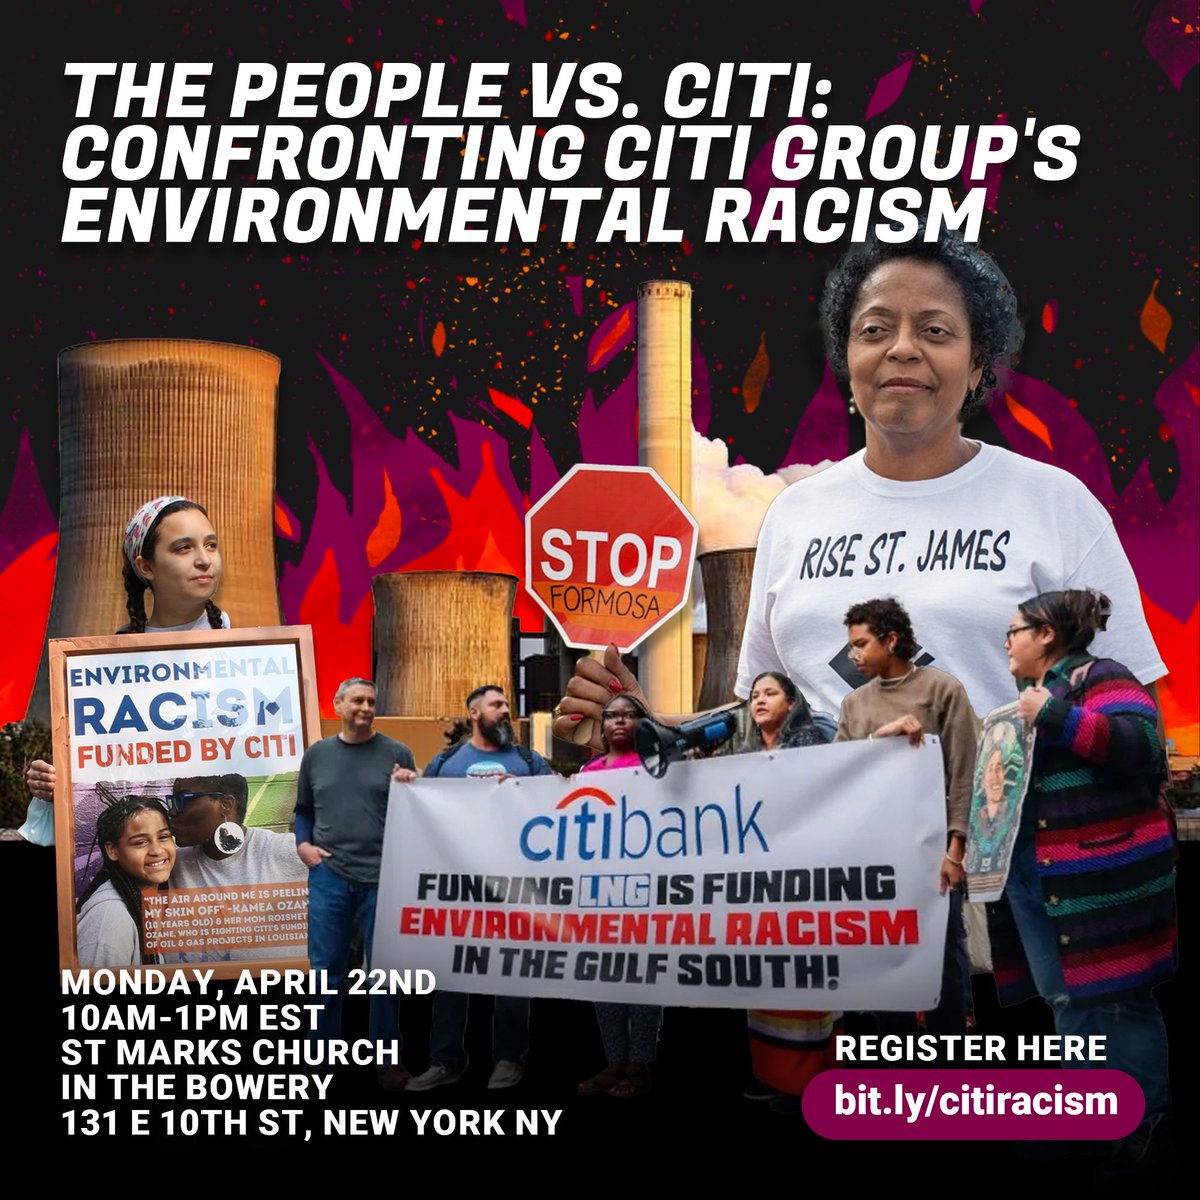 🌍✊ Join us in confronting environmental racism! Attend The People Vs. Citi: Hearing on Environmental Racism on April 22nd in NYC. Let's hold @Citi accountable for perpetuating the climate crisis. Register now: bit.ly/citiracism #EnvironmentalJustice